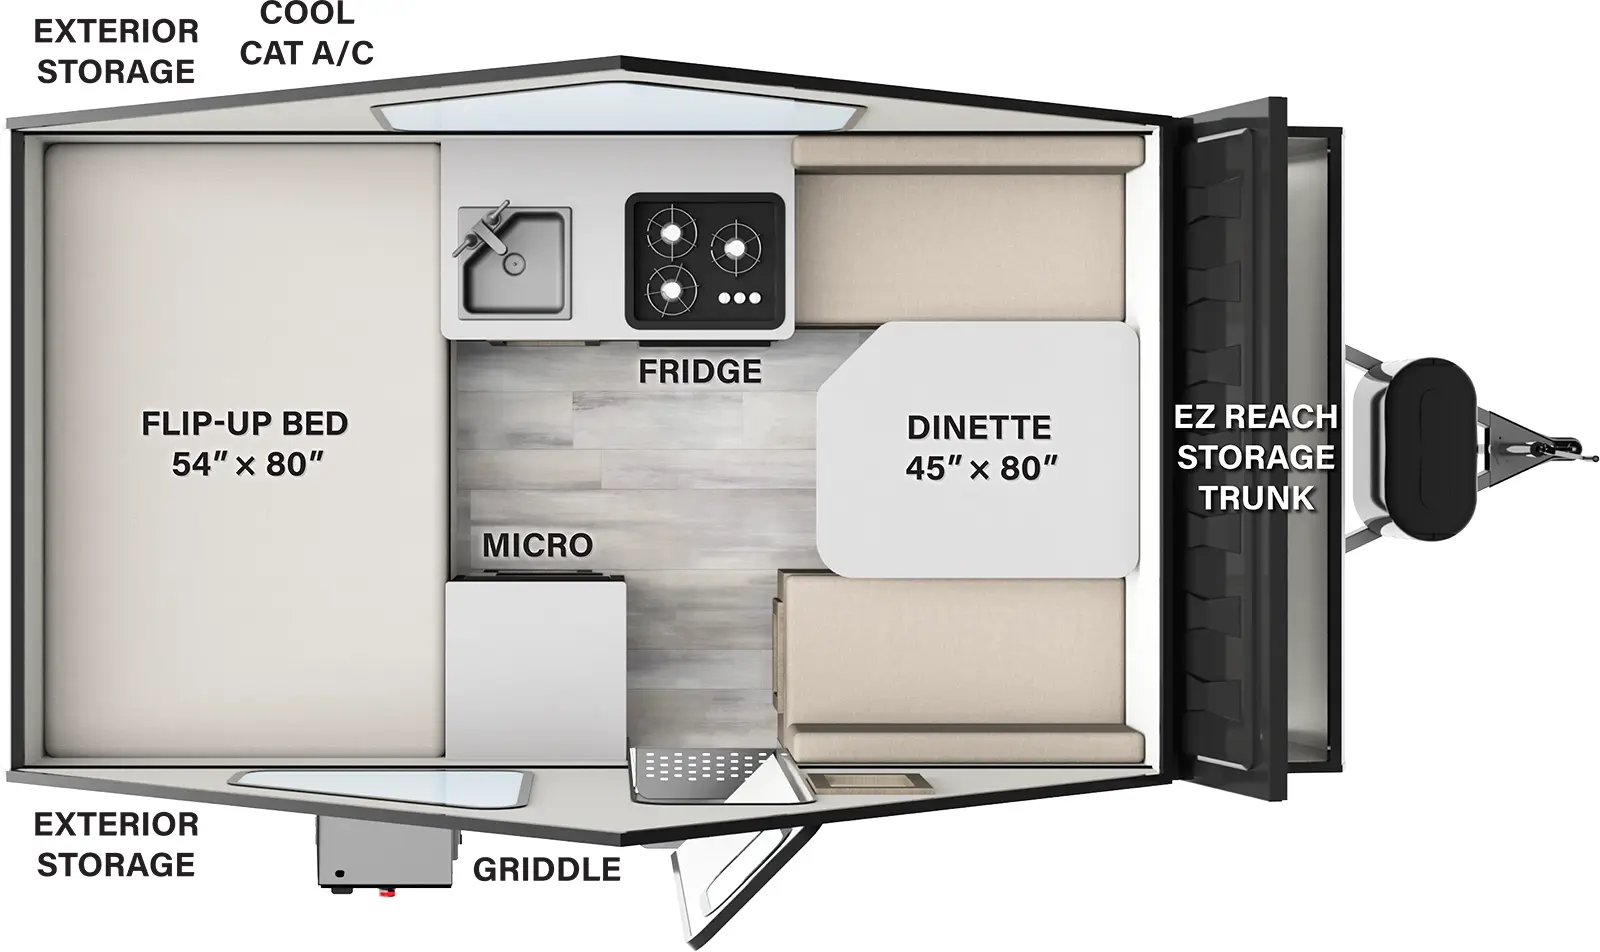 The T12RBST has no slide outs and one entry door. Exterior features include a griddle on the door side, EZ reach storage trunk, and exterior storage. Interior layout from front to back: a dinette in the front; cook top stove with a sink and a refrigerator; microwave cabinet; flip-up bed with a cool cat air conditioner in the rear.